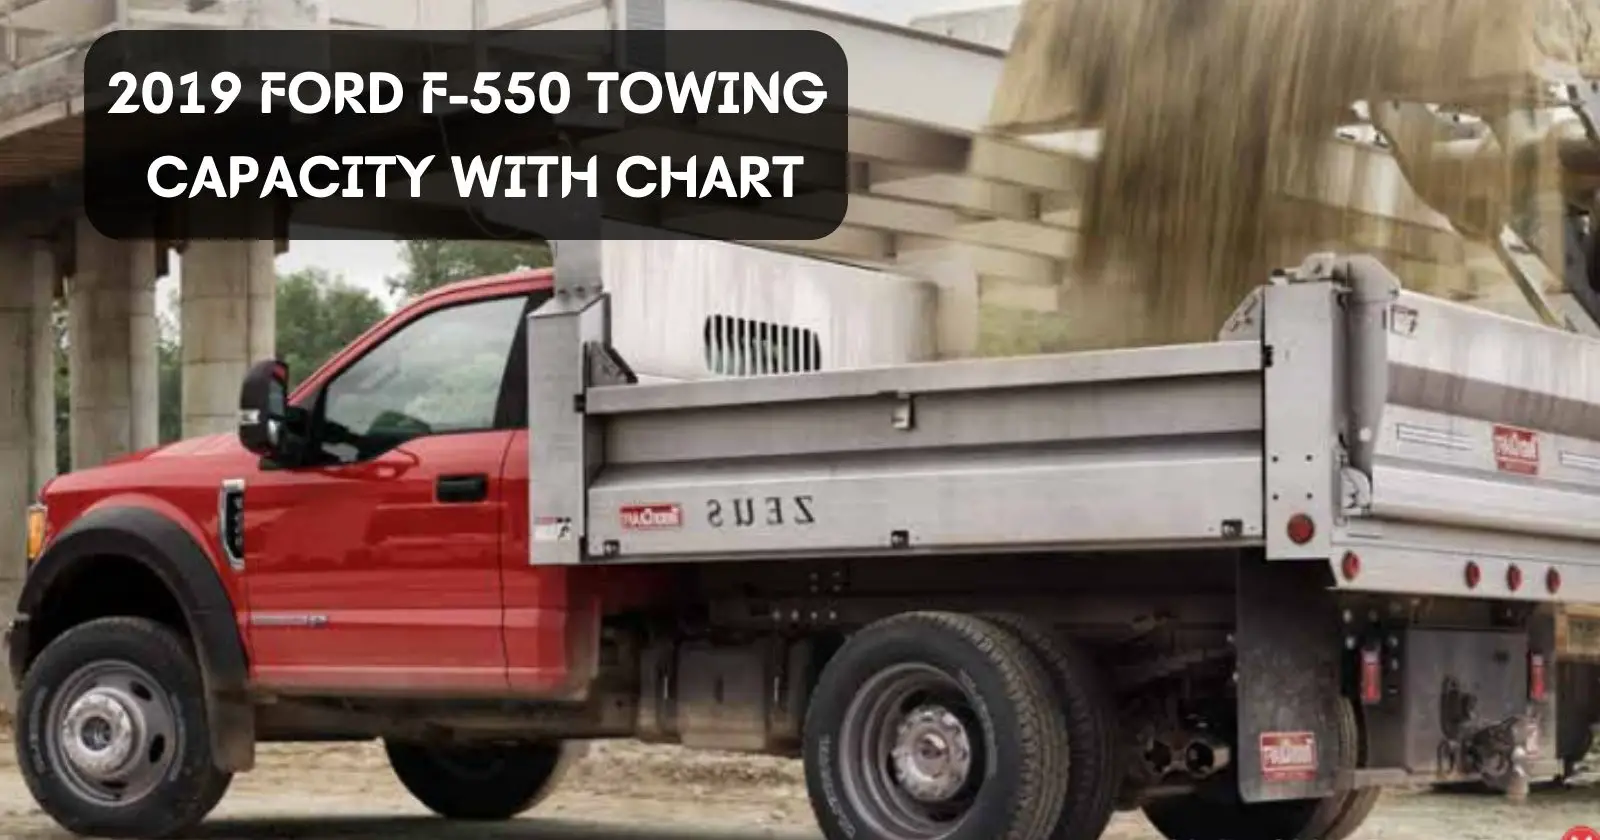 2019-ford-f-550-towing-capacity-with-chart-thecartowing